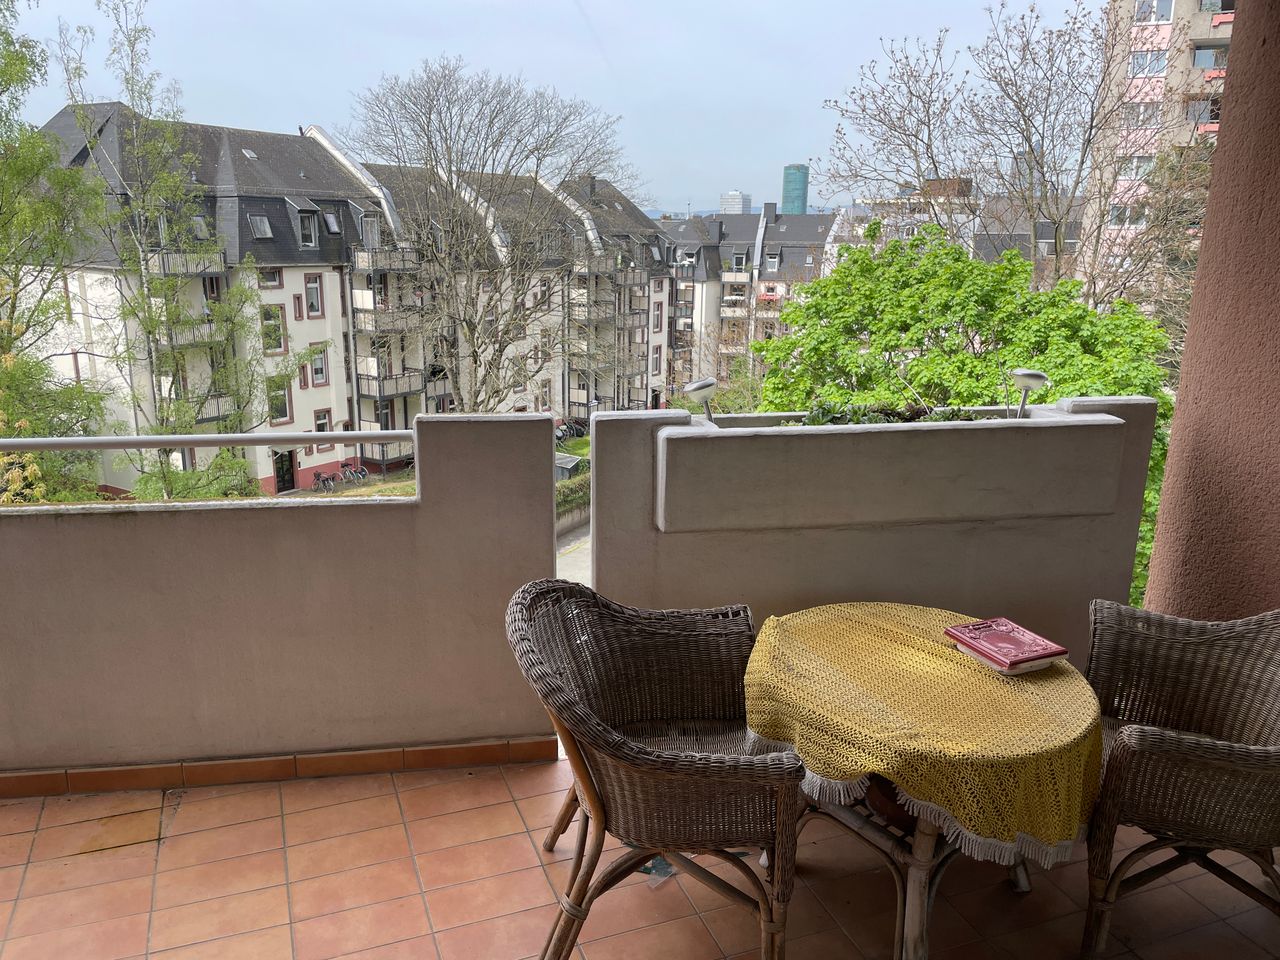 2 bedroom apartment with balcony and parking space, centrally located in Frankfurt Sachsenhausen